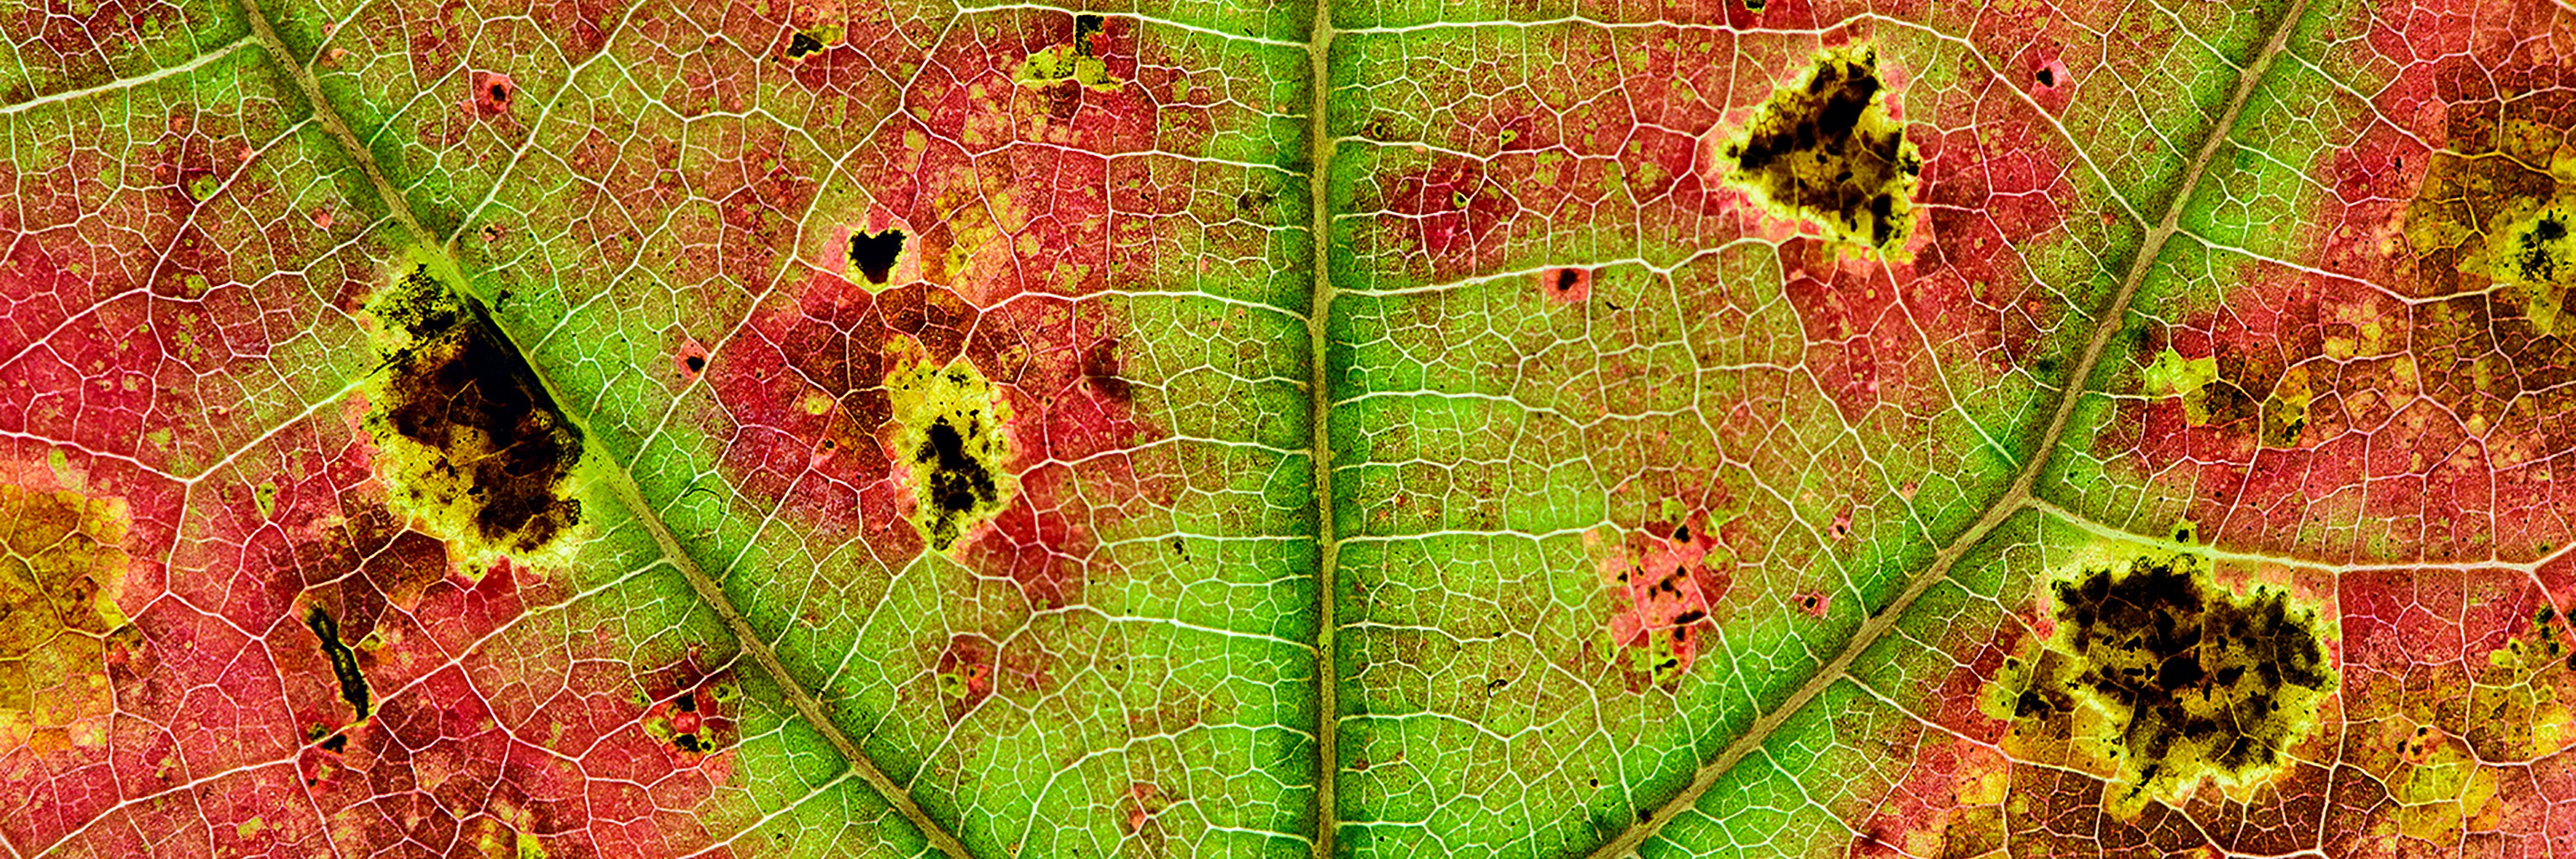 A close up of the veins of a diseased leaf.